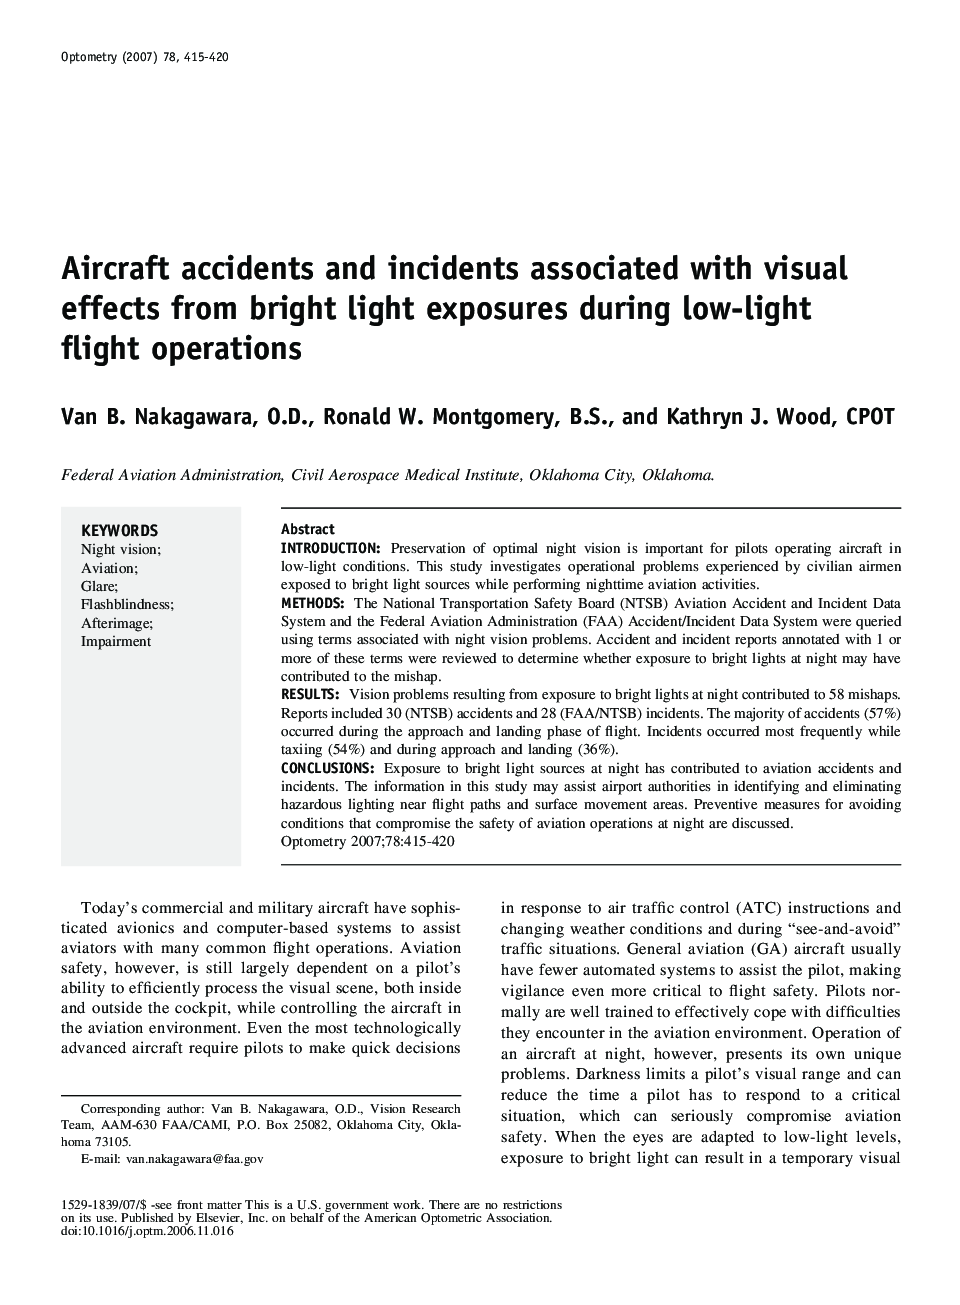 Aircraft accidents and incidents associated with visual effects from bright light exposures during low-light flight operations